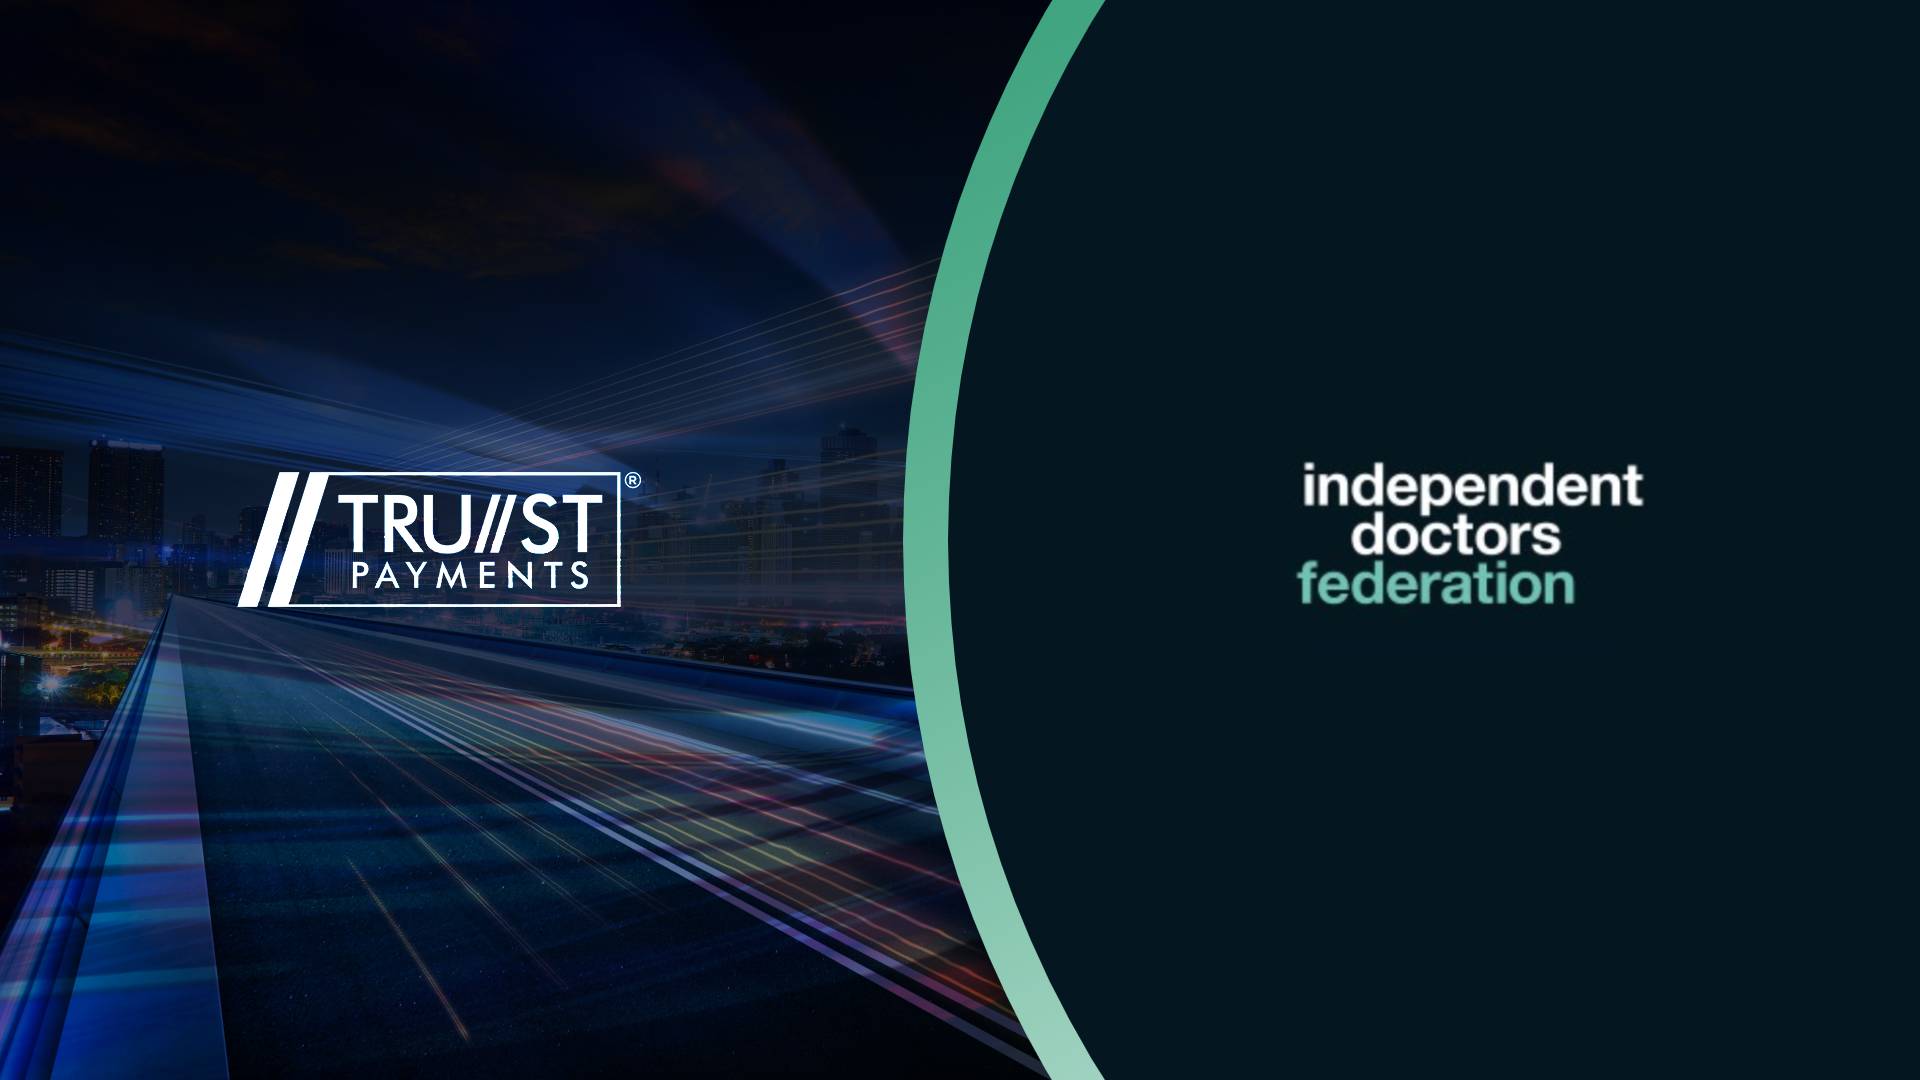 Trust Payments targets healthcare with Independent Doctors Federation partnership